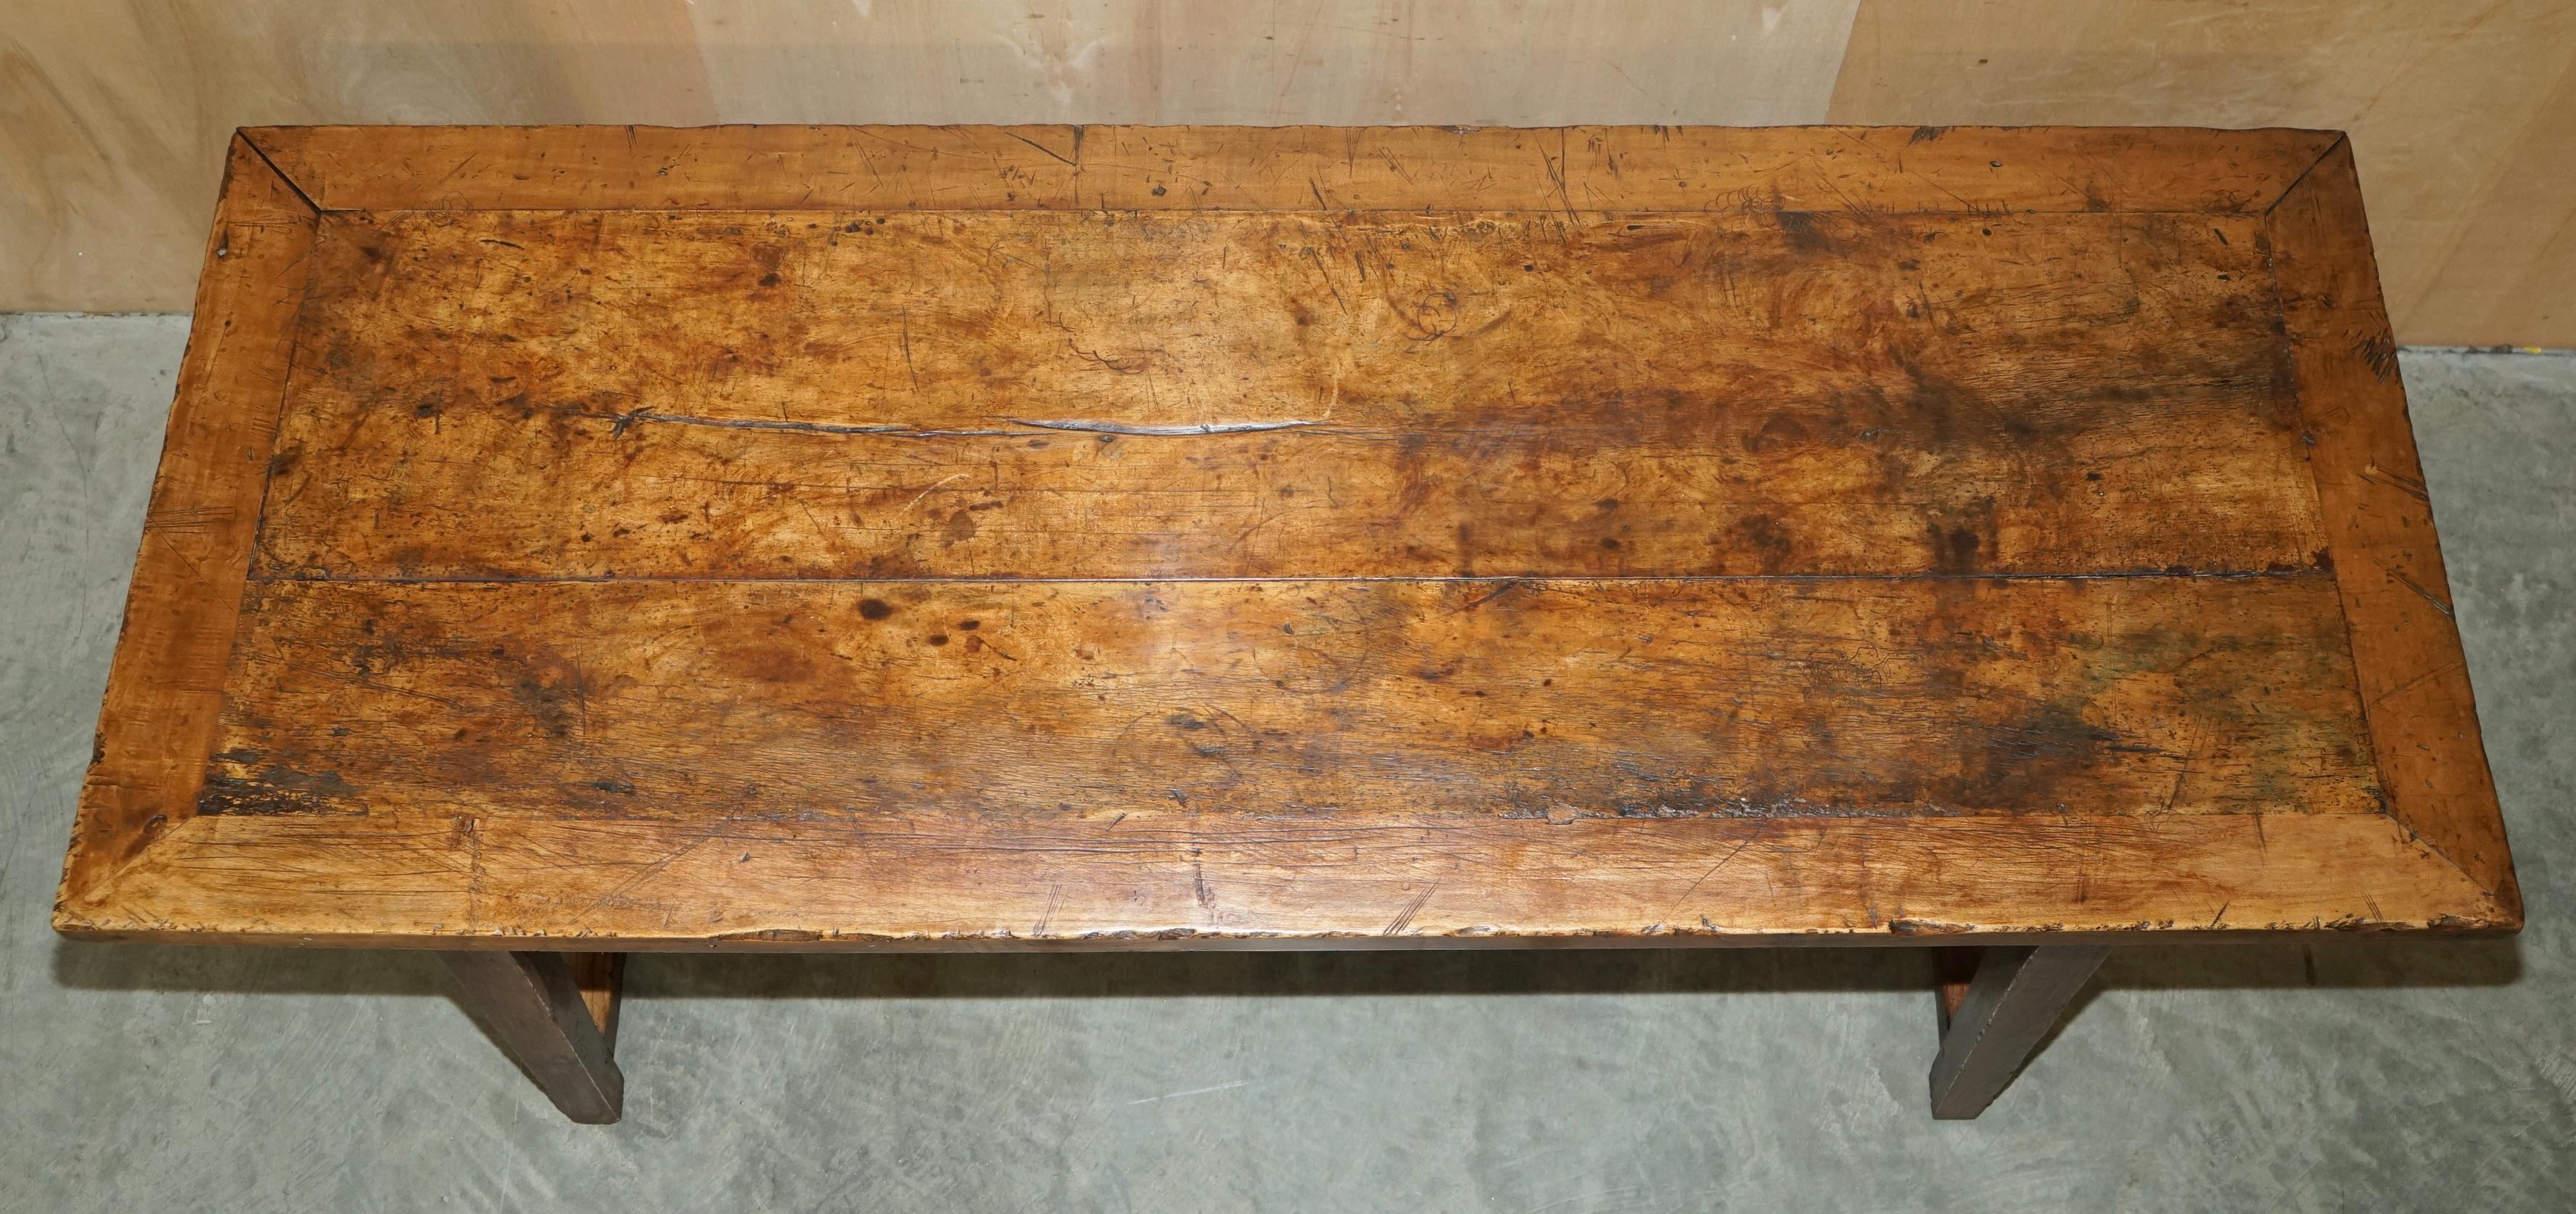 Royal House Antiques

Royal House Antiques is delighted to offer for sale this absolutely stunning, Burr Fruitwood French Country House two plank top Refectory dining table

Please note the delivery fee listed is just a guide, it covers within the